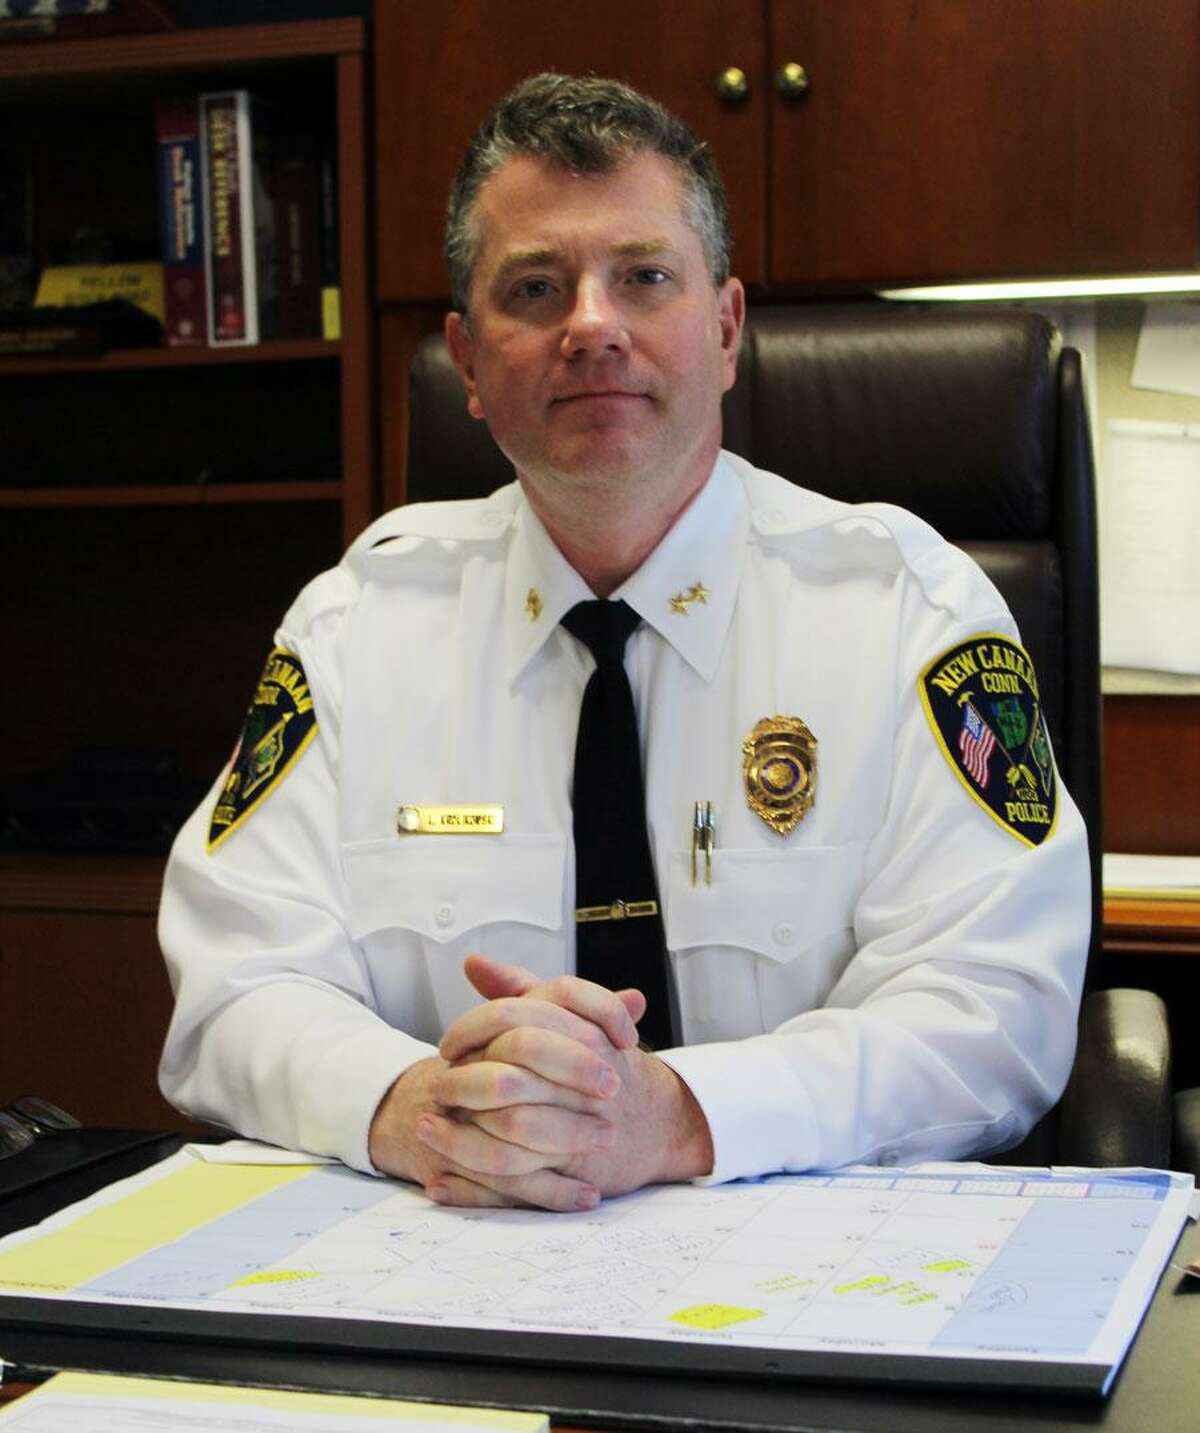 New Canaan Chief of Police Leon Krolikowski met with other chiefs at a police forum.